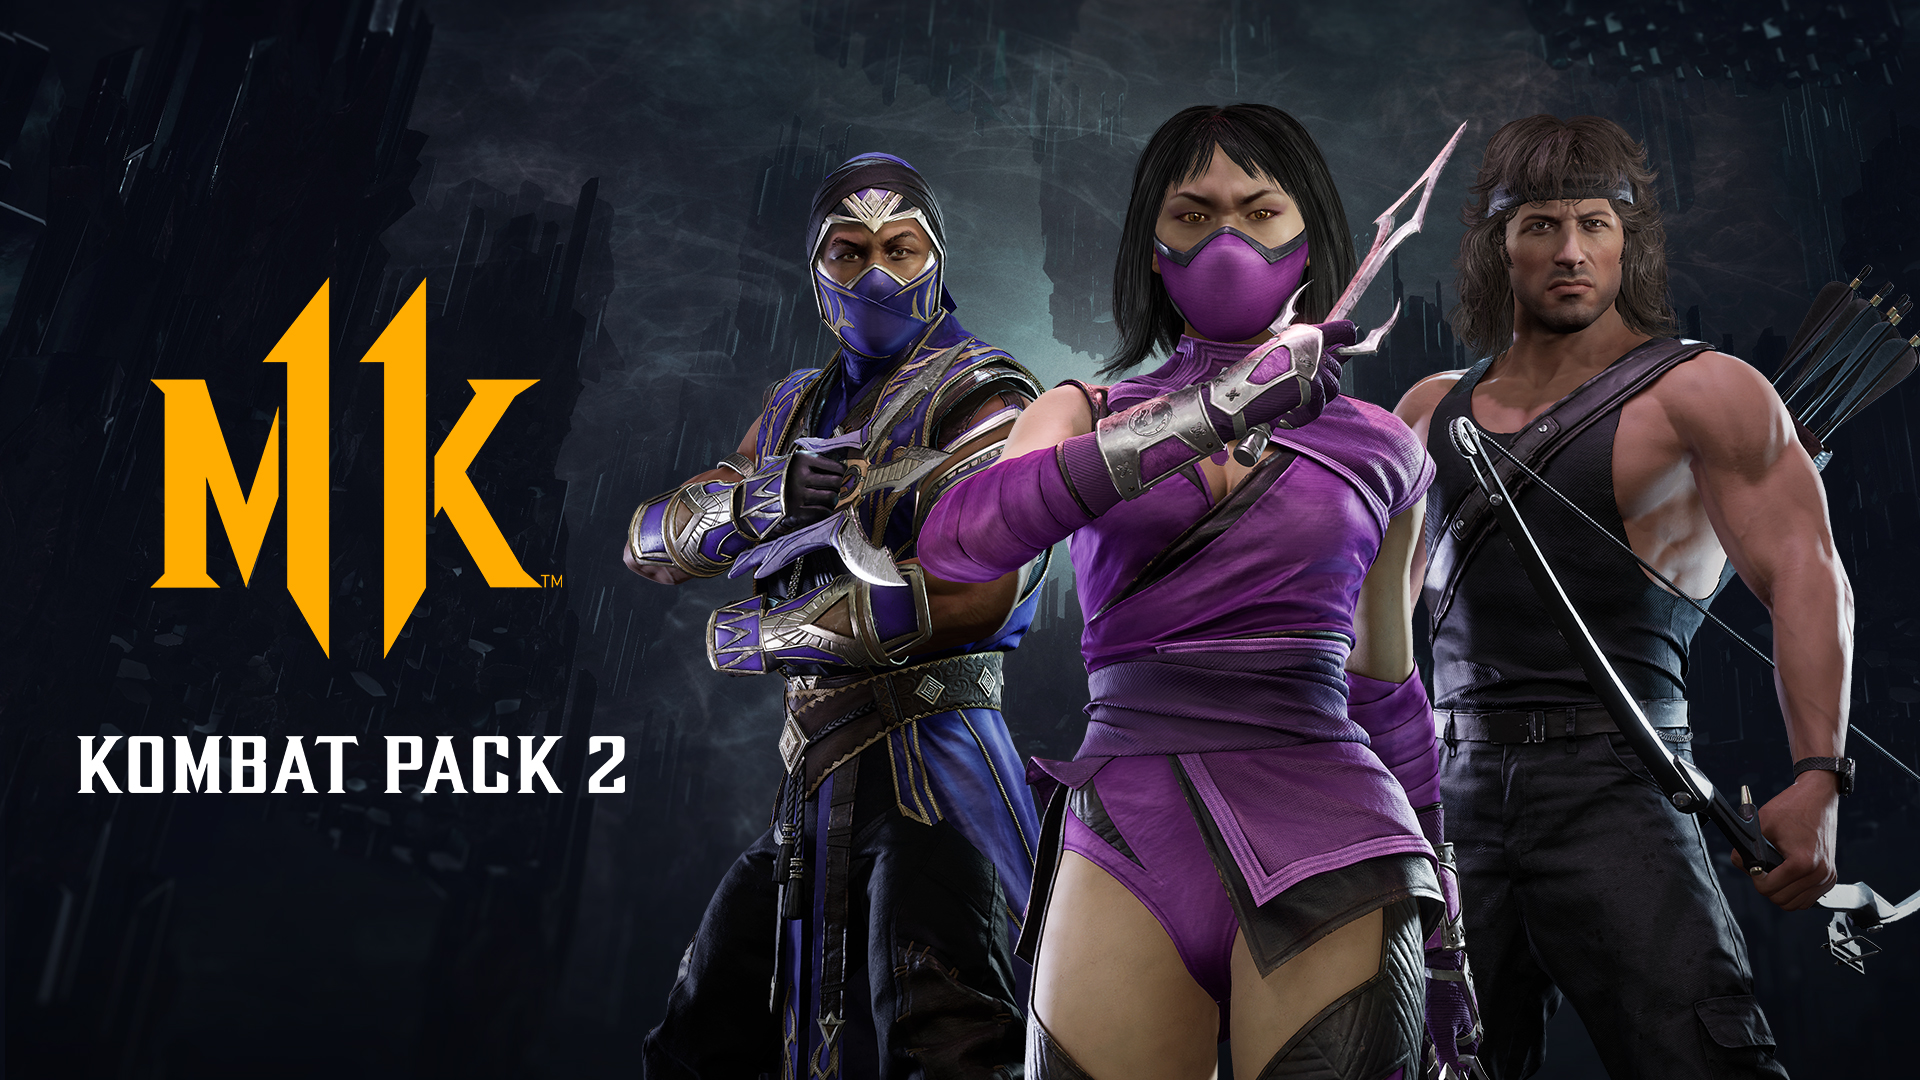 Mortal Kombat 1's updated character select screen features a glimpse at all  of the main roster DLC characters in the Kombat Pack